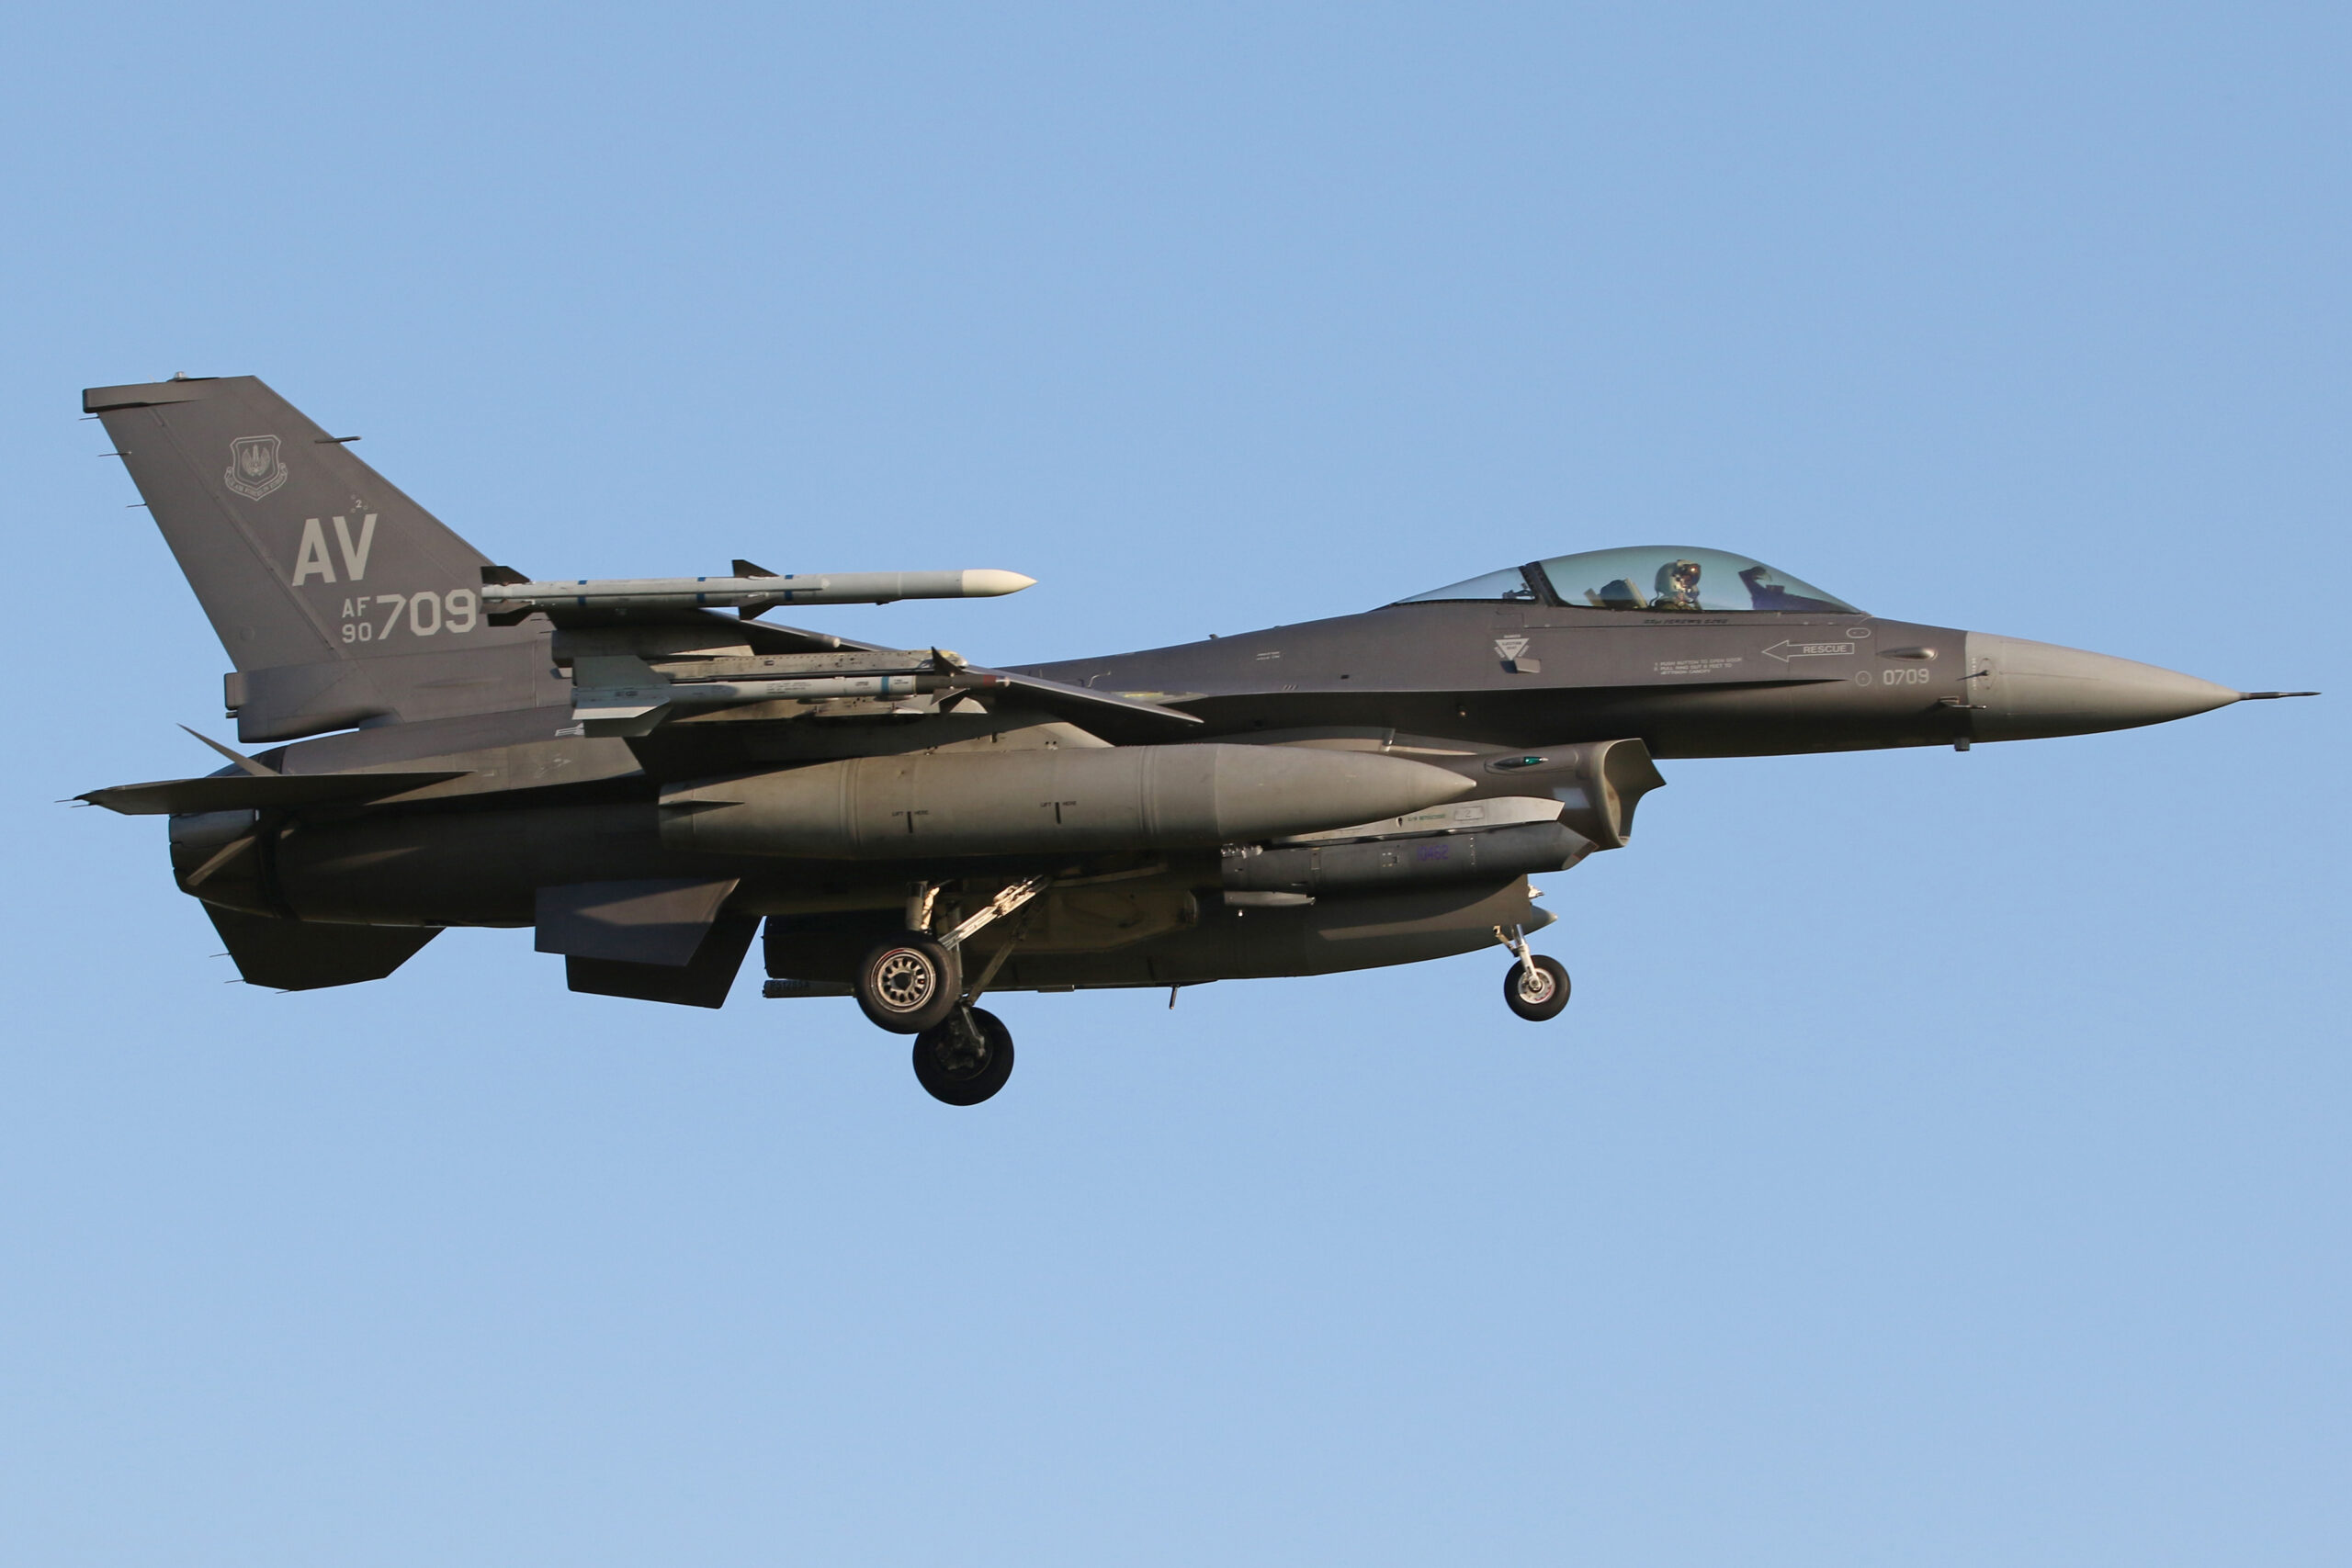 F-16s From The 31st FW At Aviano In Italy, Operate Out Of RAF Lakenheath For A Four Week Deployment